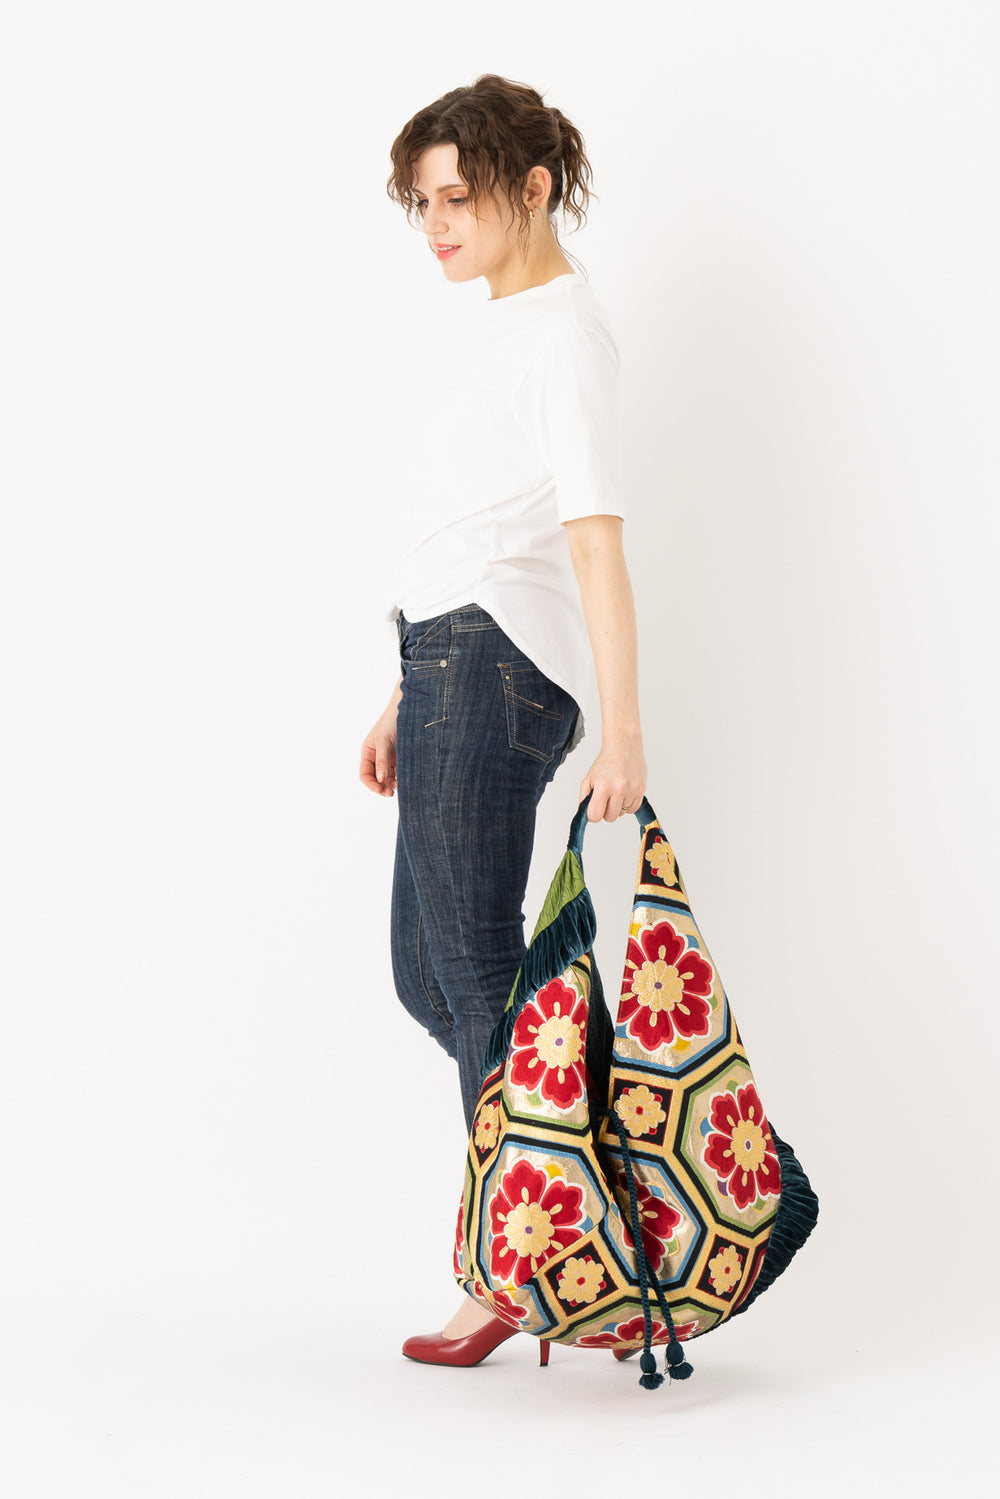 A woman is carrying a stunning embroidered boho bag, showcasing the intricate details on this large tote bag. This large boho bag elevates her style and is an example of embroidered tote bag styling.